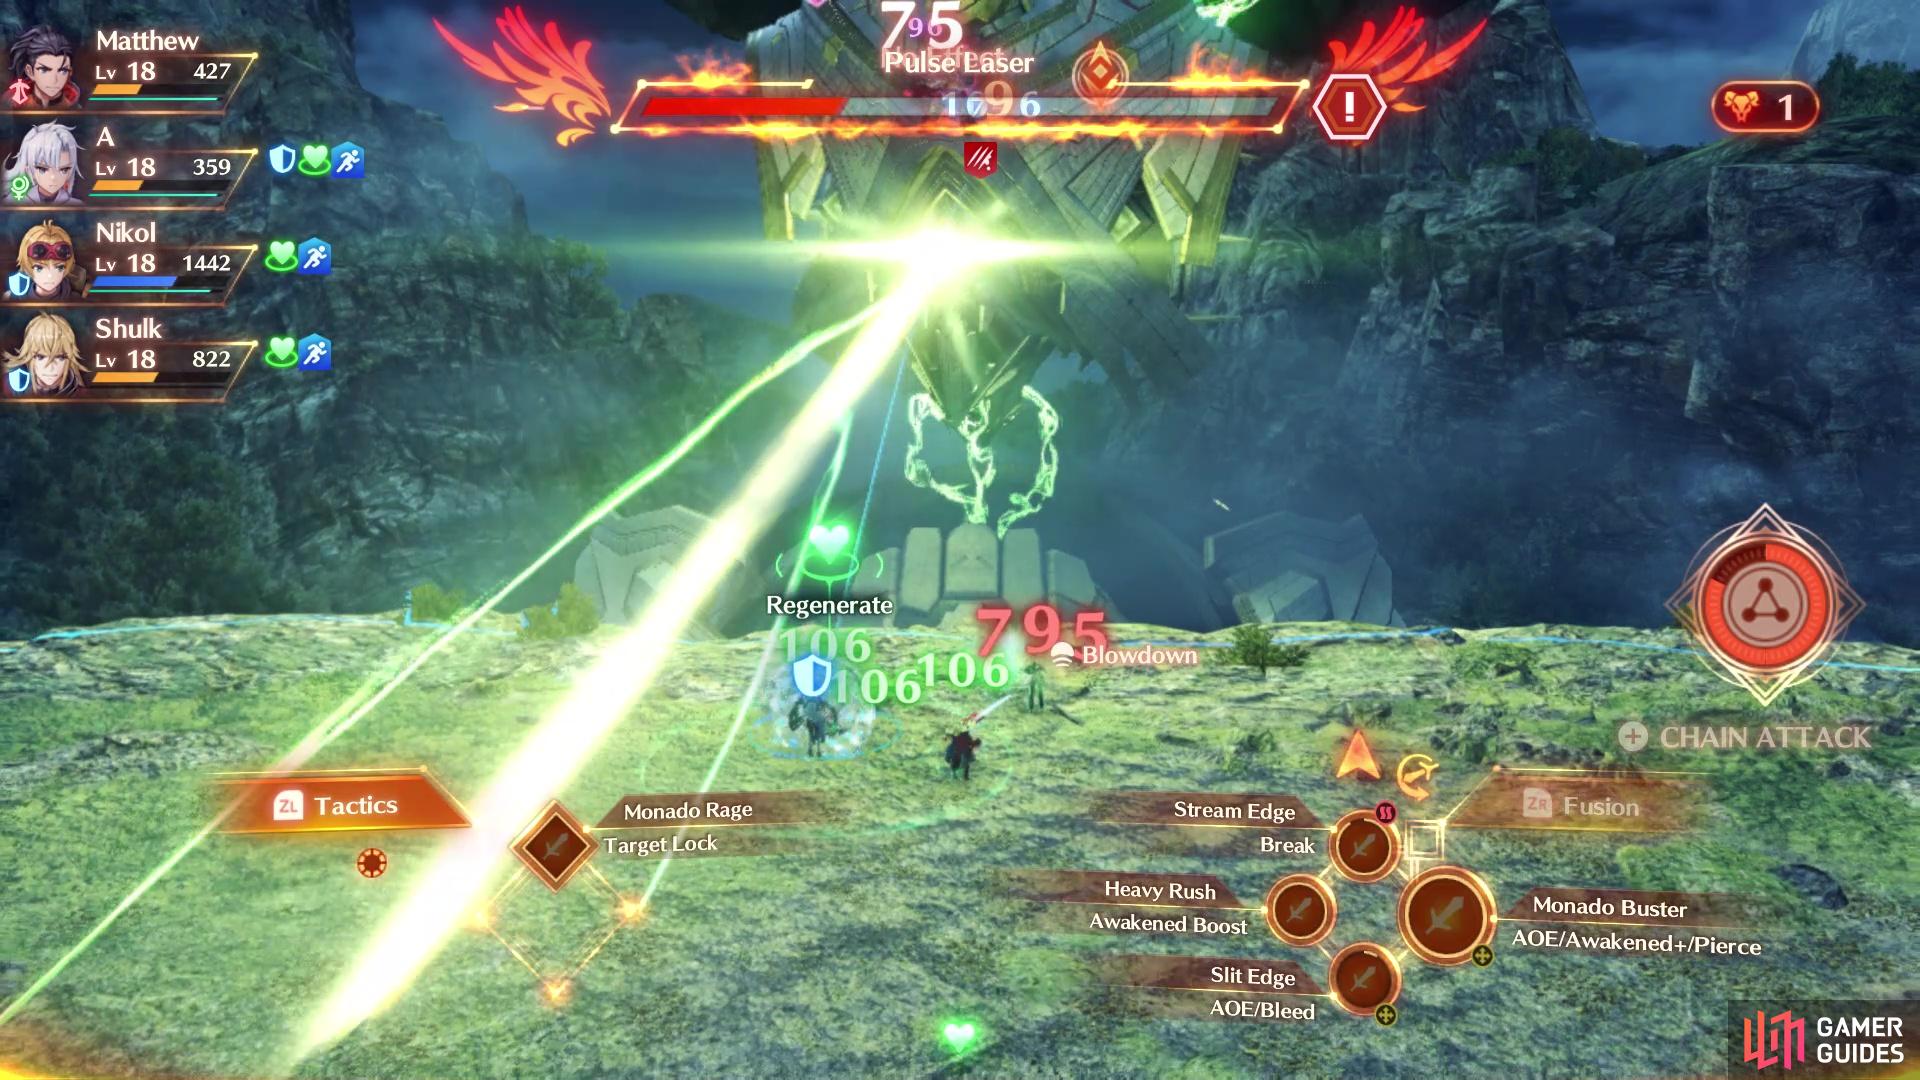 as will Pulse Laser, but this attack only occurs in the second half of the fight